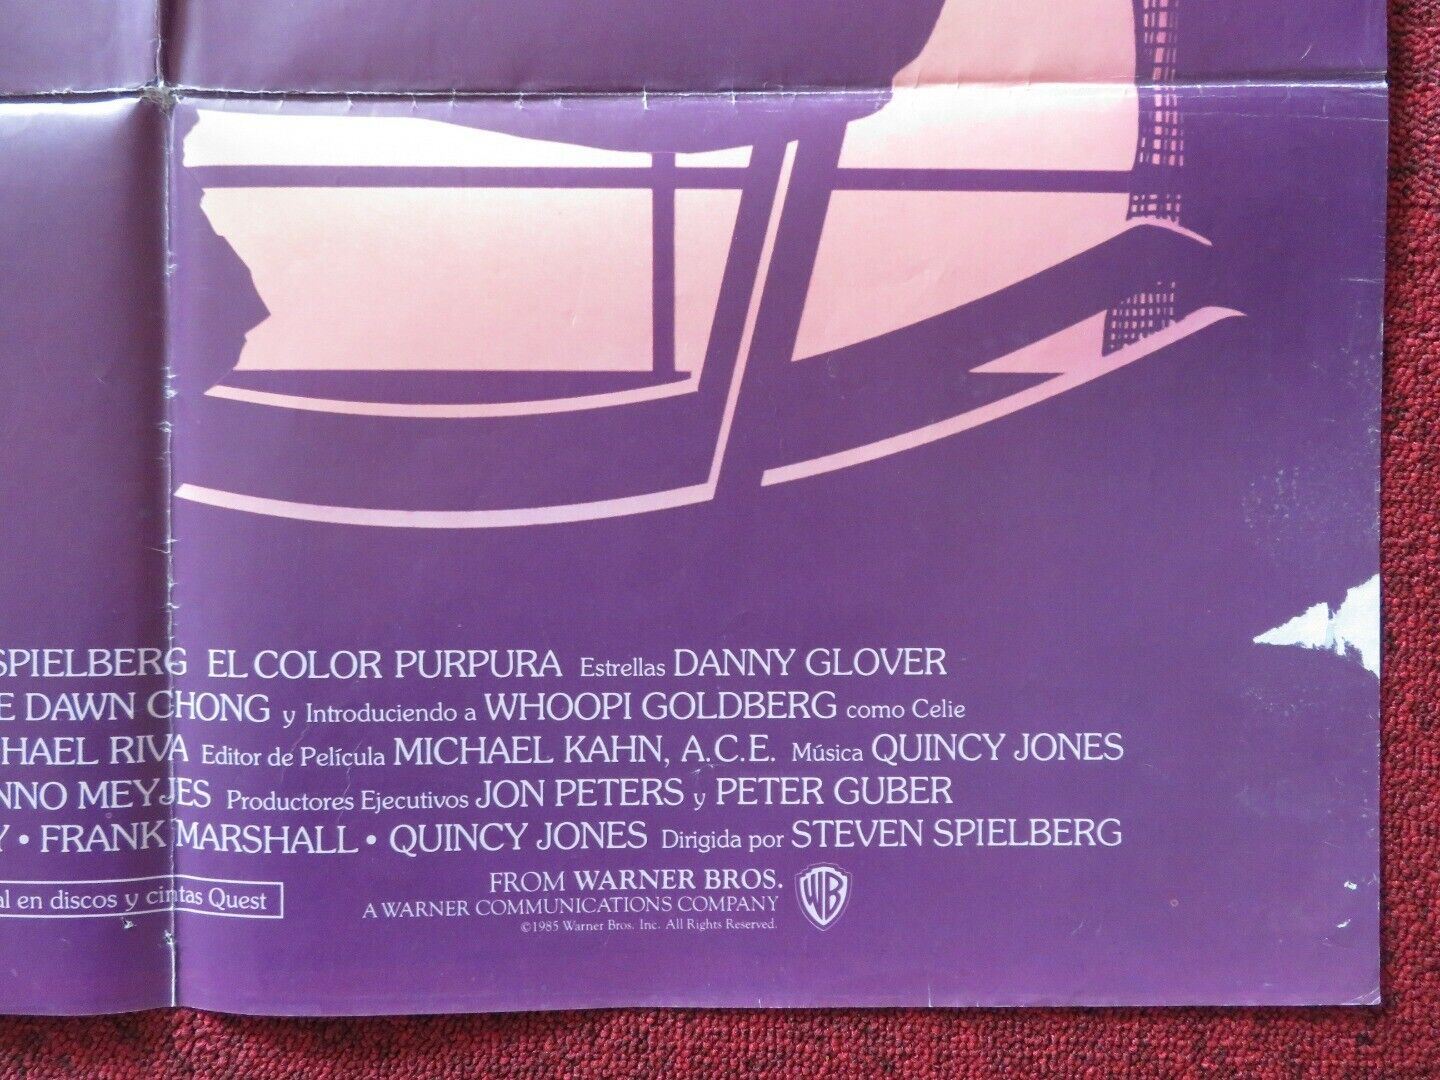 THE COLOR PURPLE SPANISH ONE SHEET FOLDED POSTER SPIELBERG DANNY GLOVER 1985